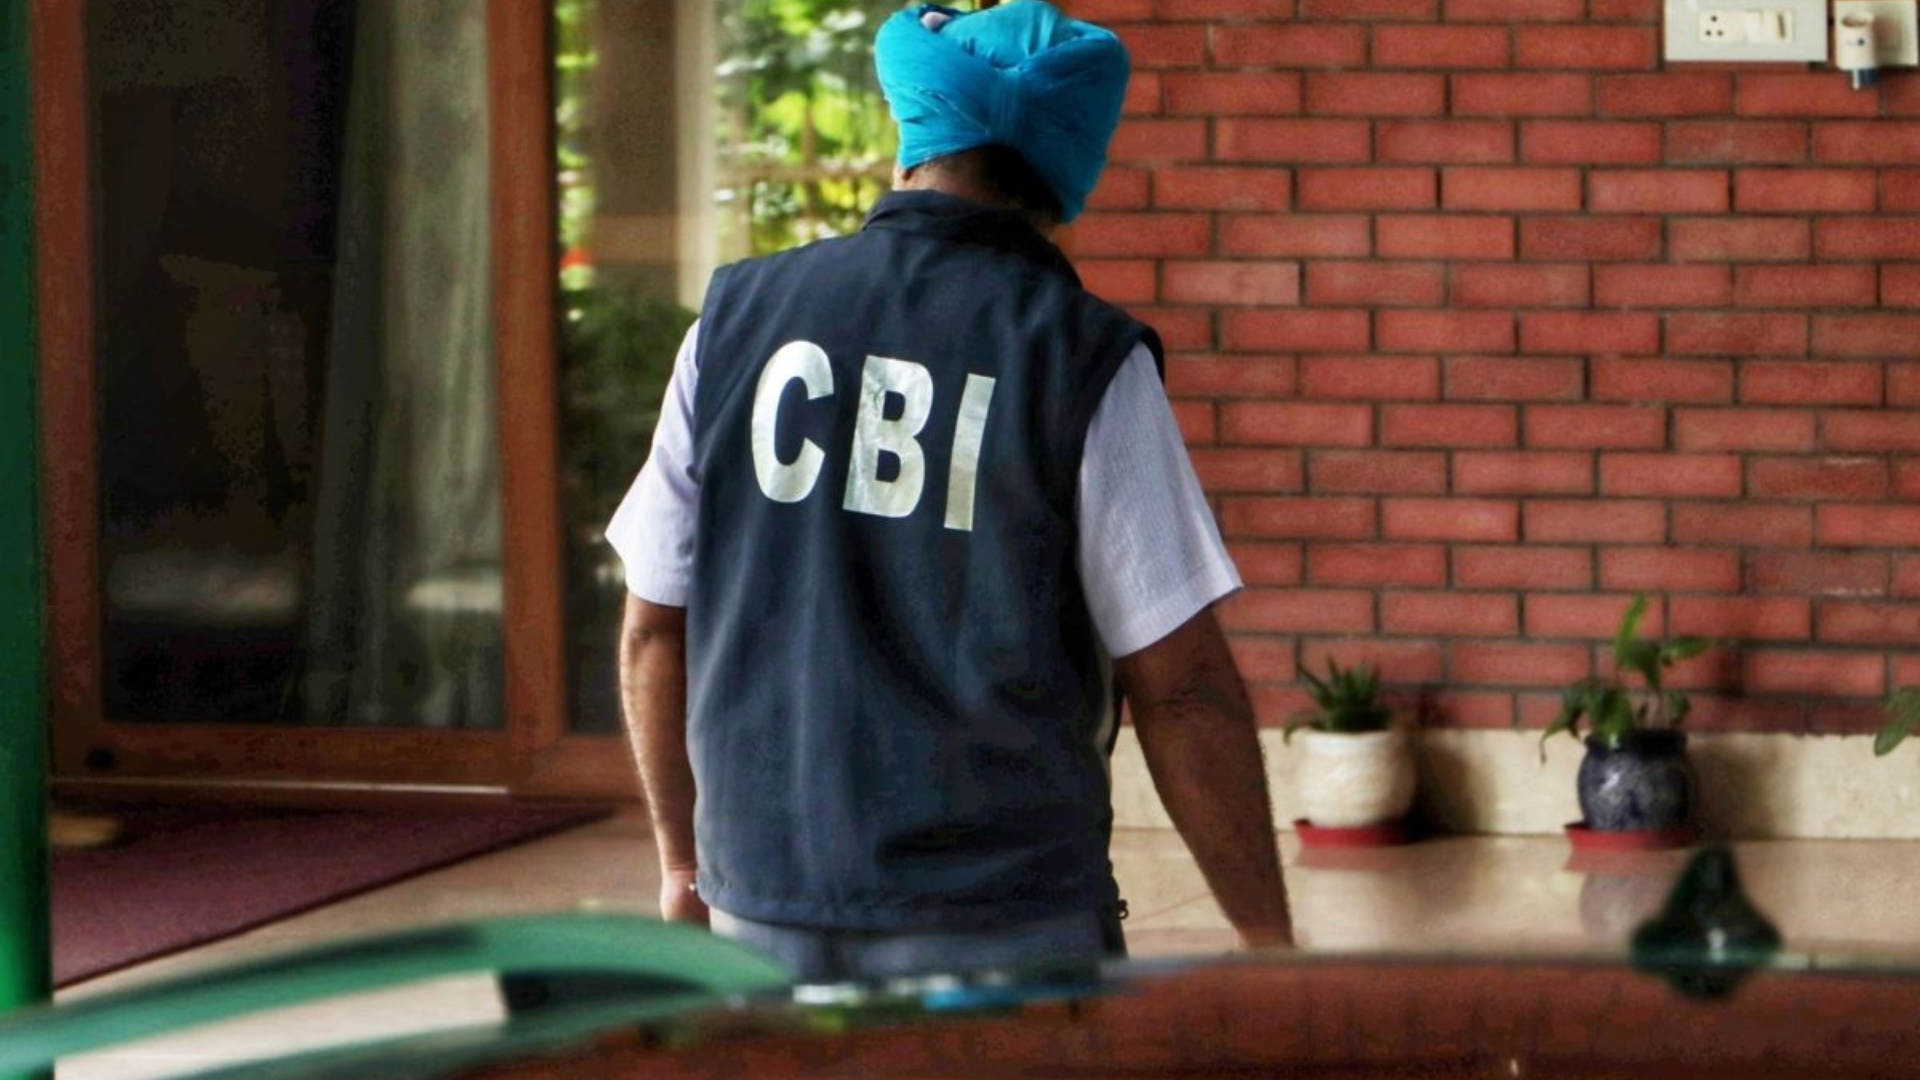 CBI Submits Chargesheet In Case Of Manipur Arms Theft Against 7 Suspects